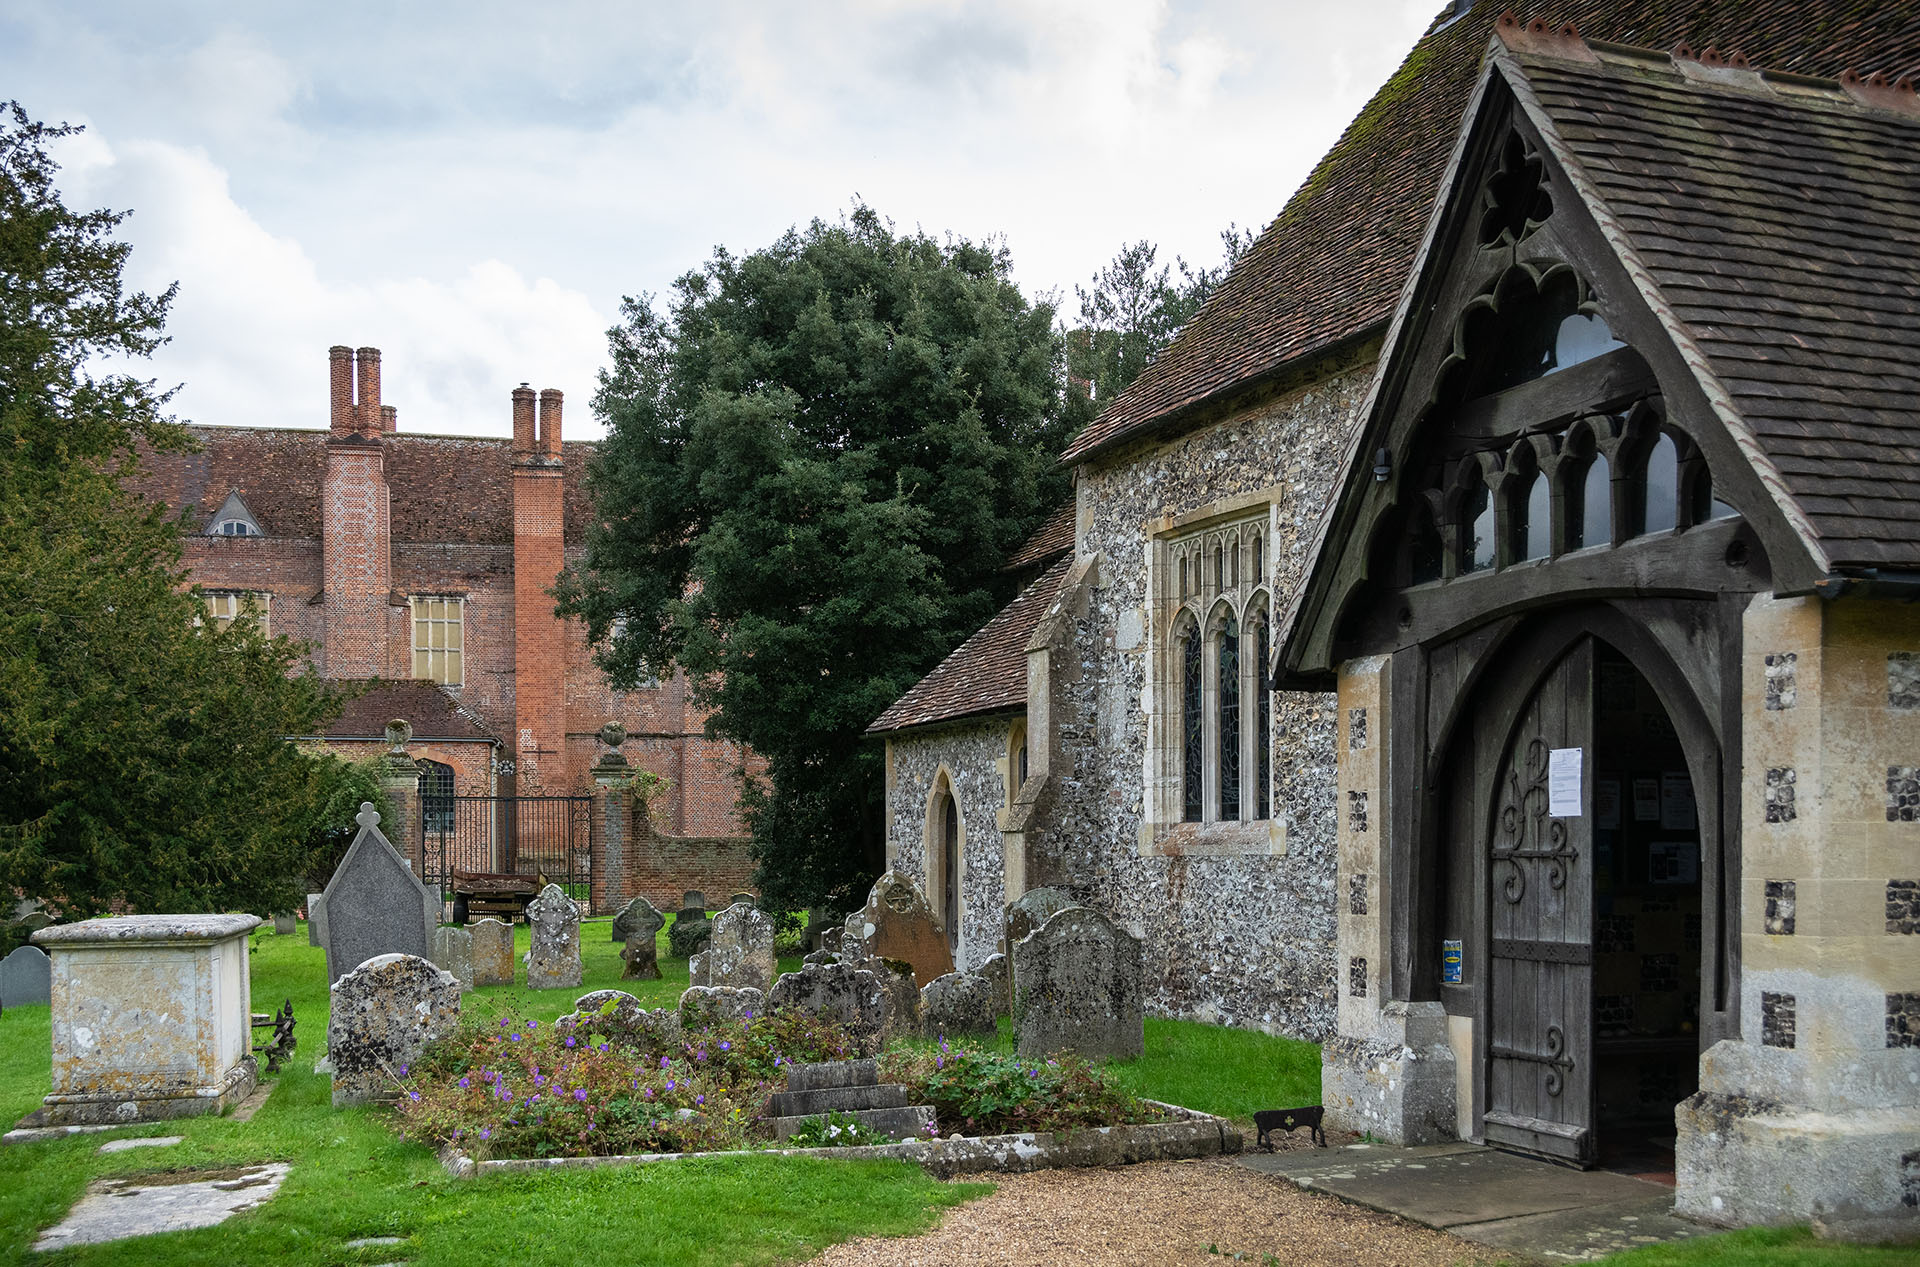 The remarkable site of Mapledurham village beside the Thames, with a mill, pretty stone and flint church, and an impressive Elizabethan manor house